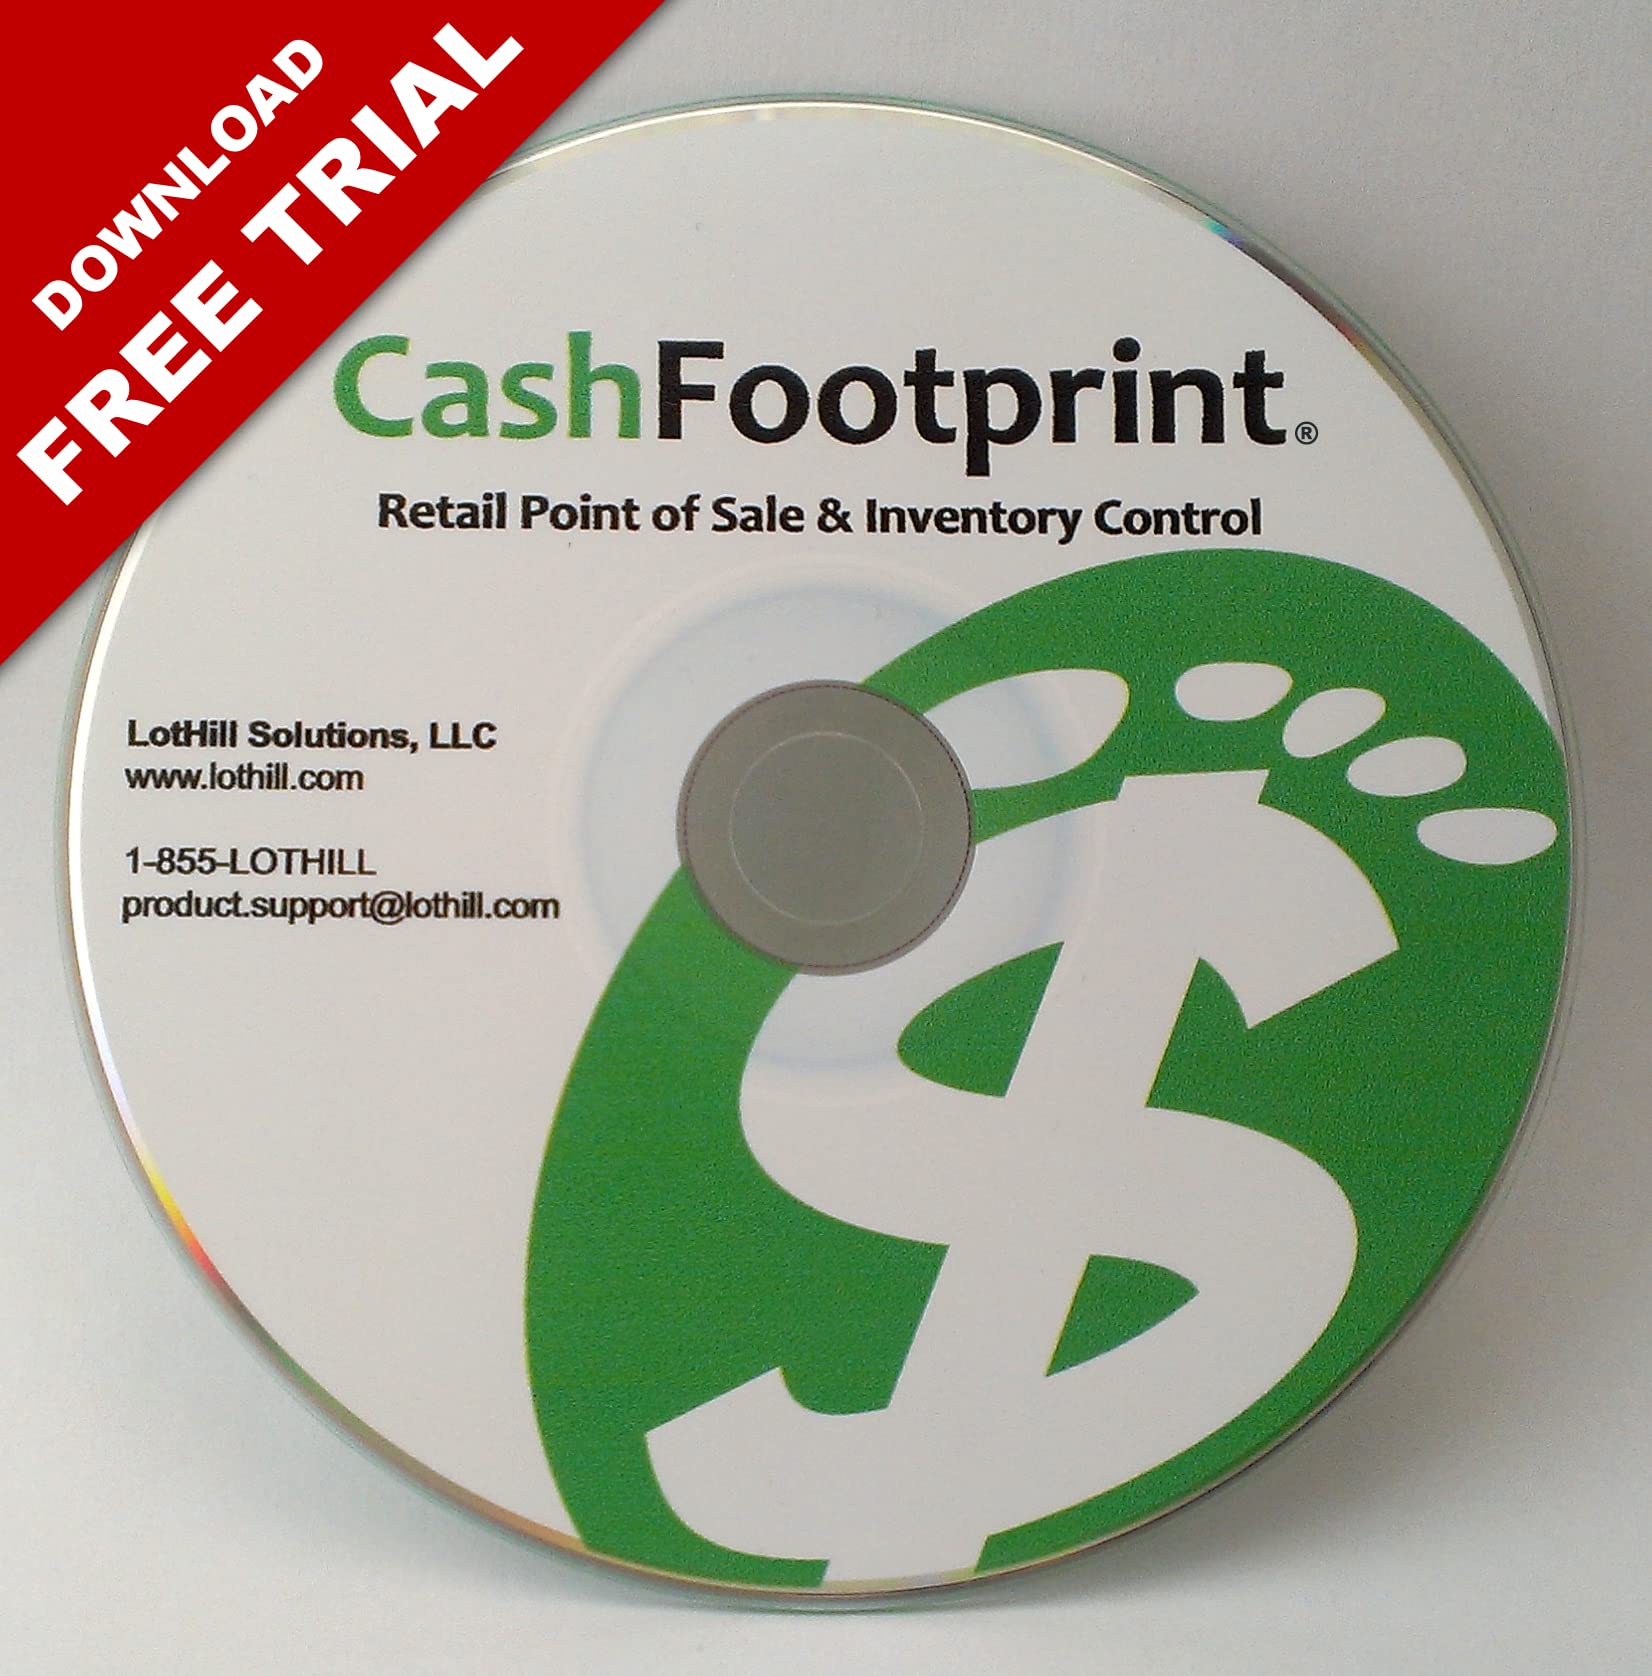 Professional POS Software and Inventory Control, No Monthly Fees, Free Support & Updates - CashFootprint Retail Point of Sale Software by LotHill Solutions - Professional Edition